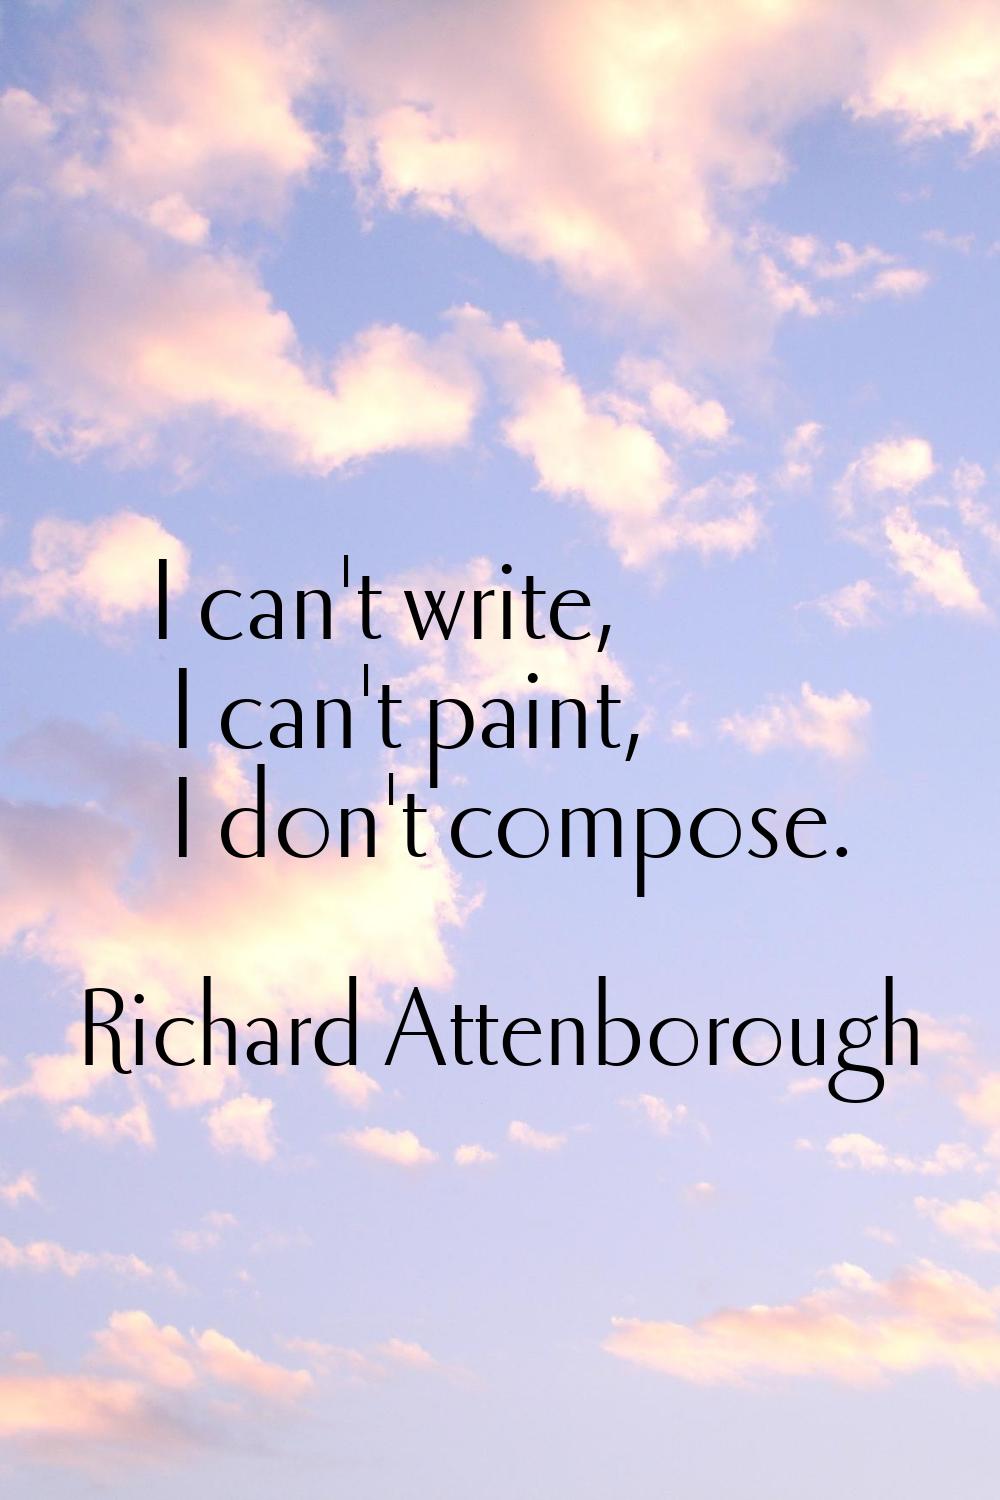 I can't write, I can't paint, I don't compose.